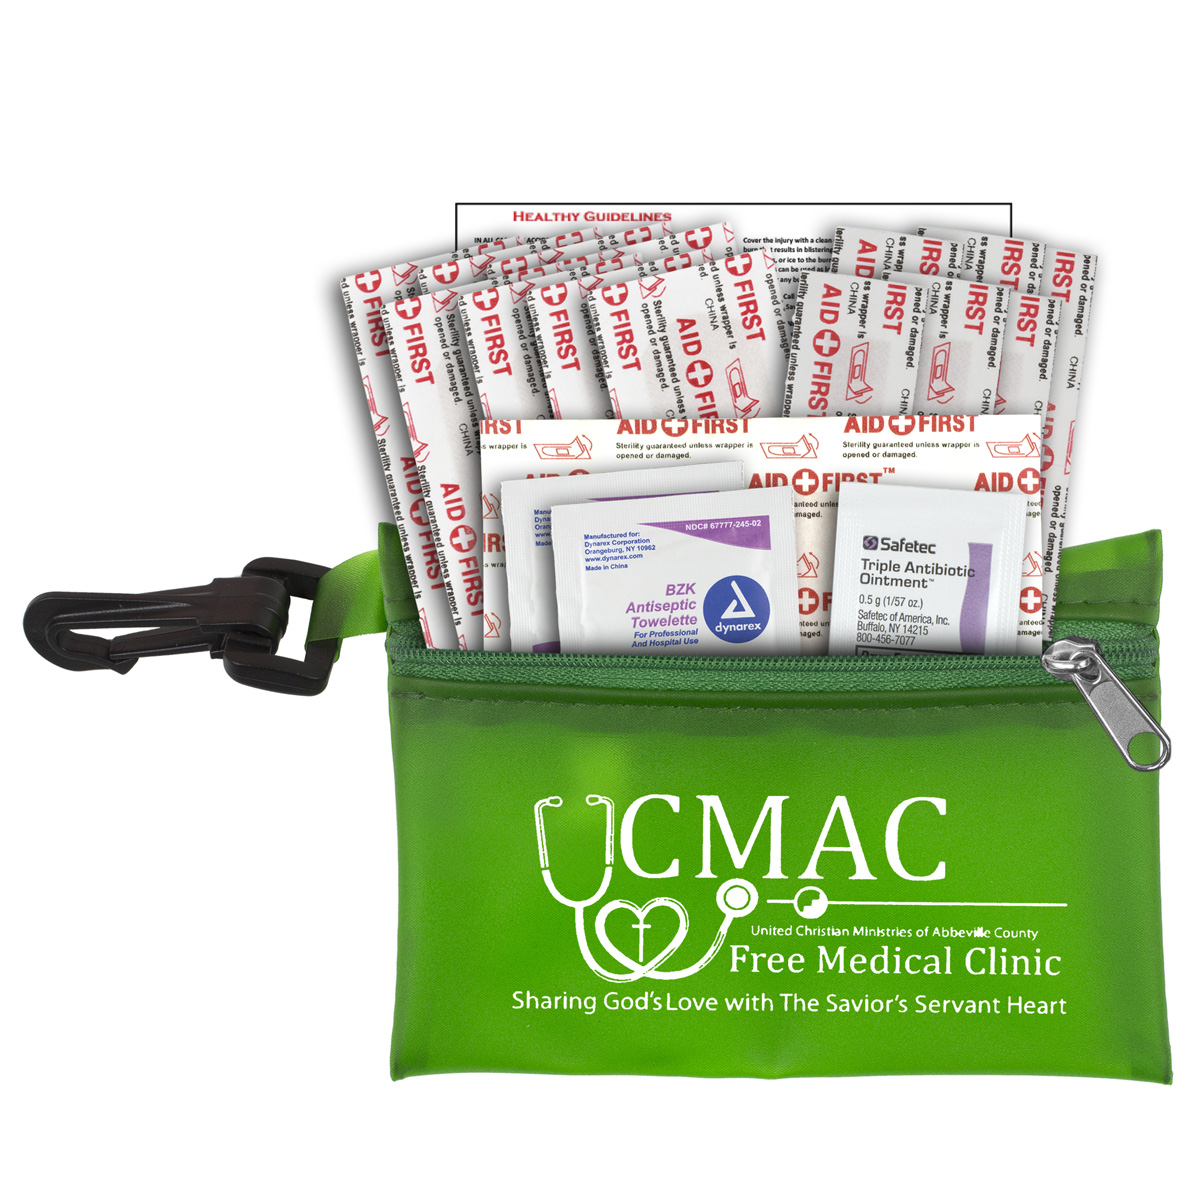 "MEDI" 19 Piece Healthy Living Pack Components inserted into Translucent Zipper Kit with Plastic Carabiner Attachment